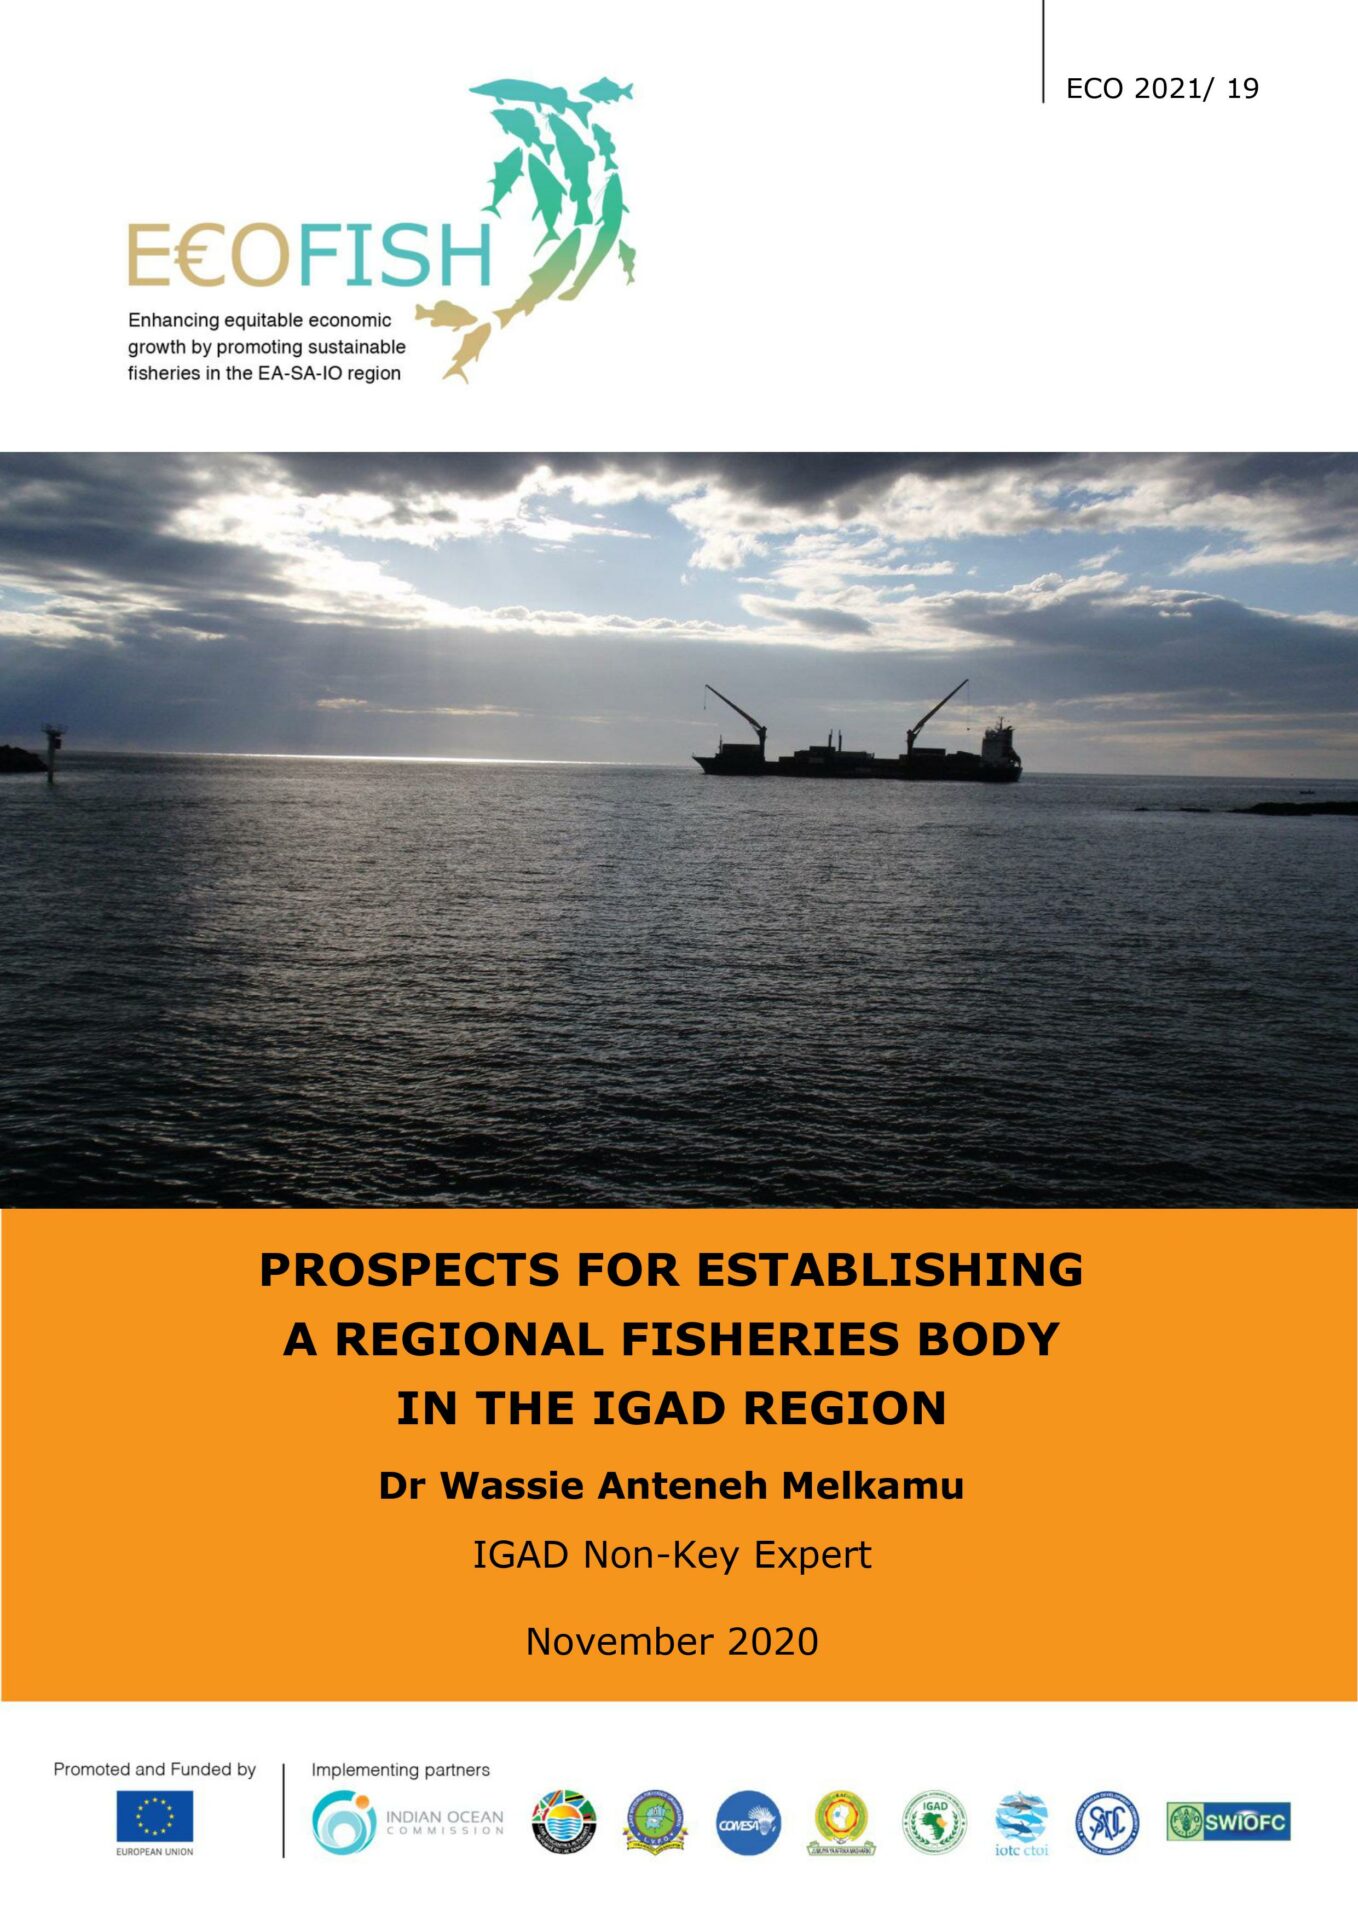 PROSPECTS FOR ESTABLISHING A REGIONAL FISHERIES BODY IN THE IGAD REGION